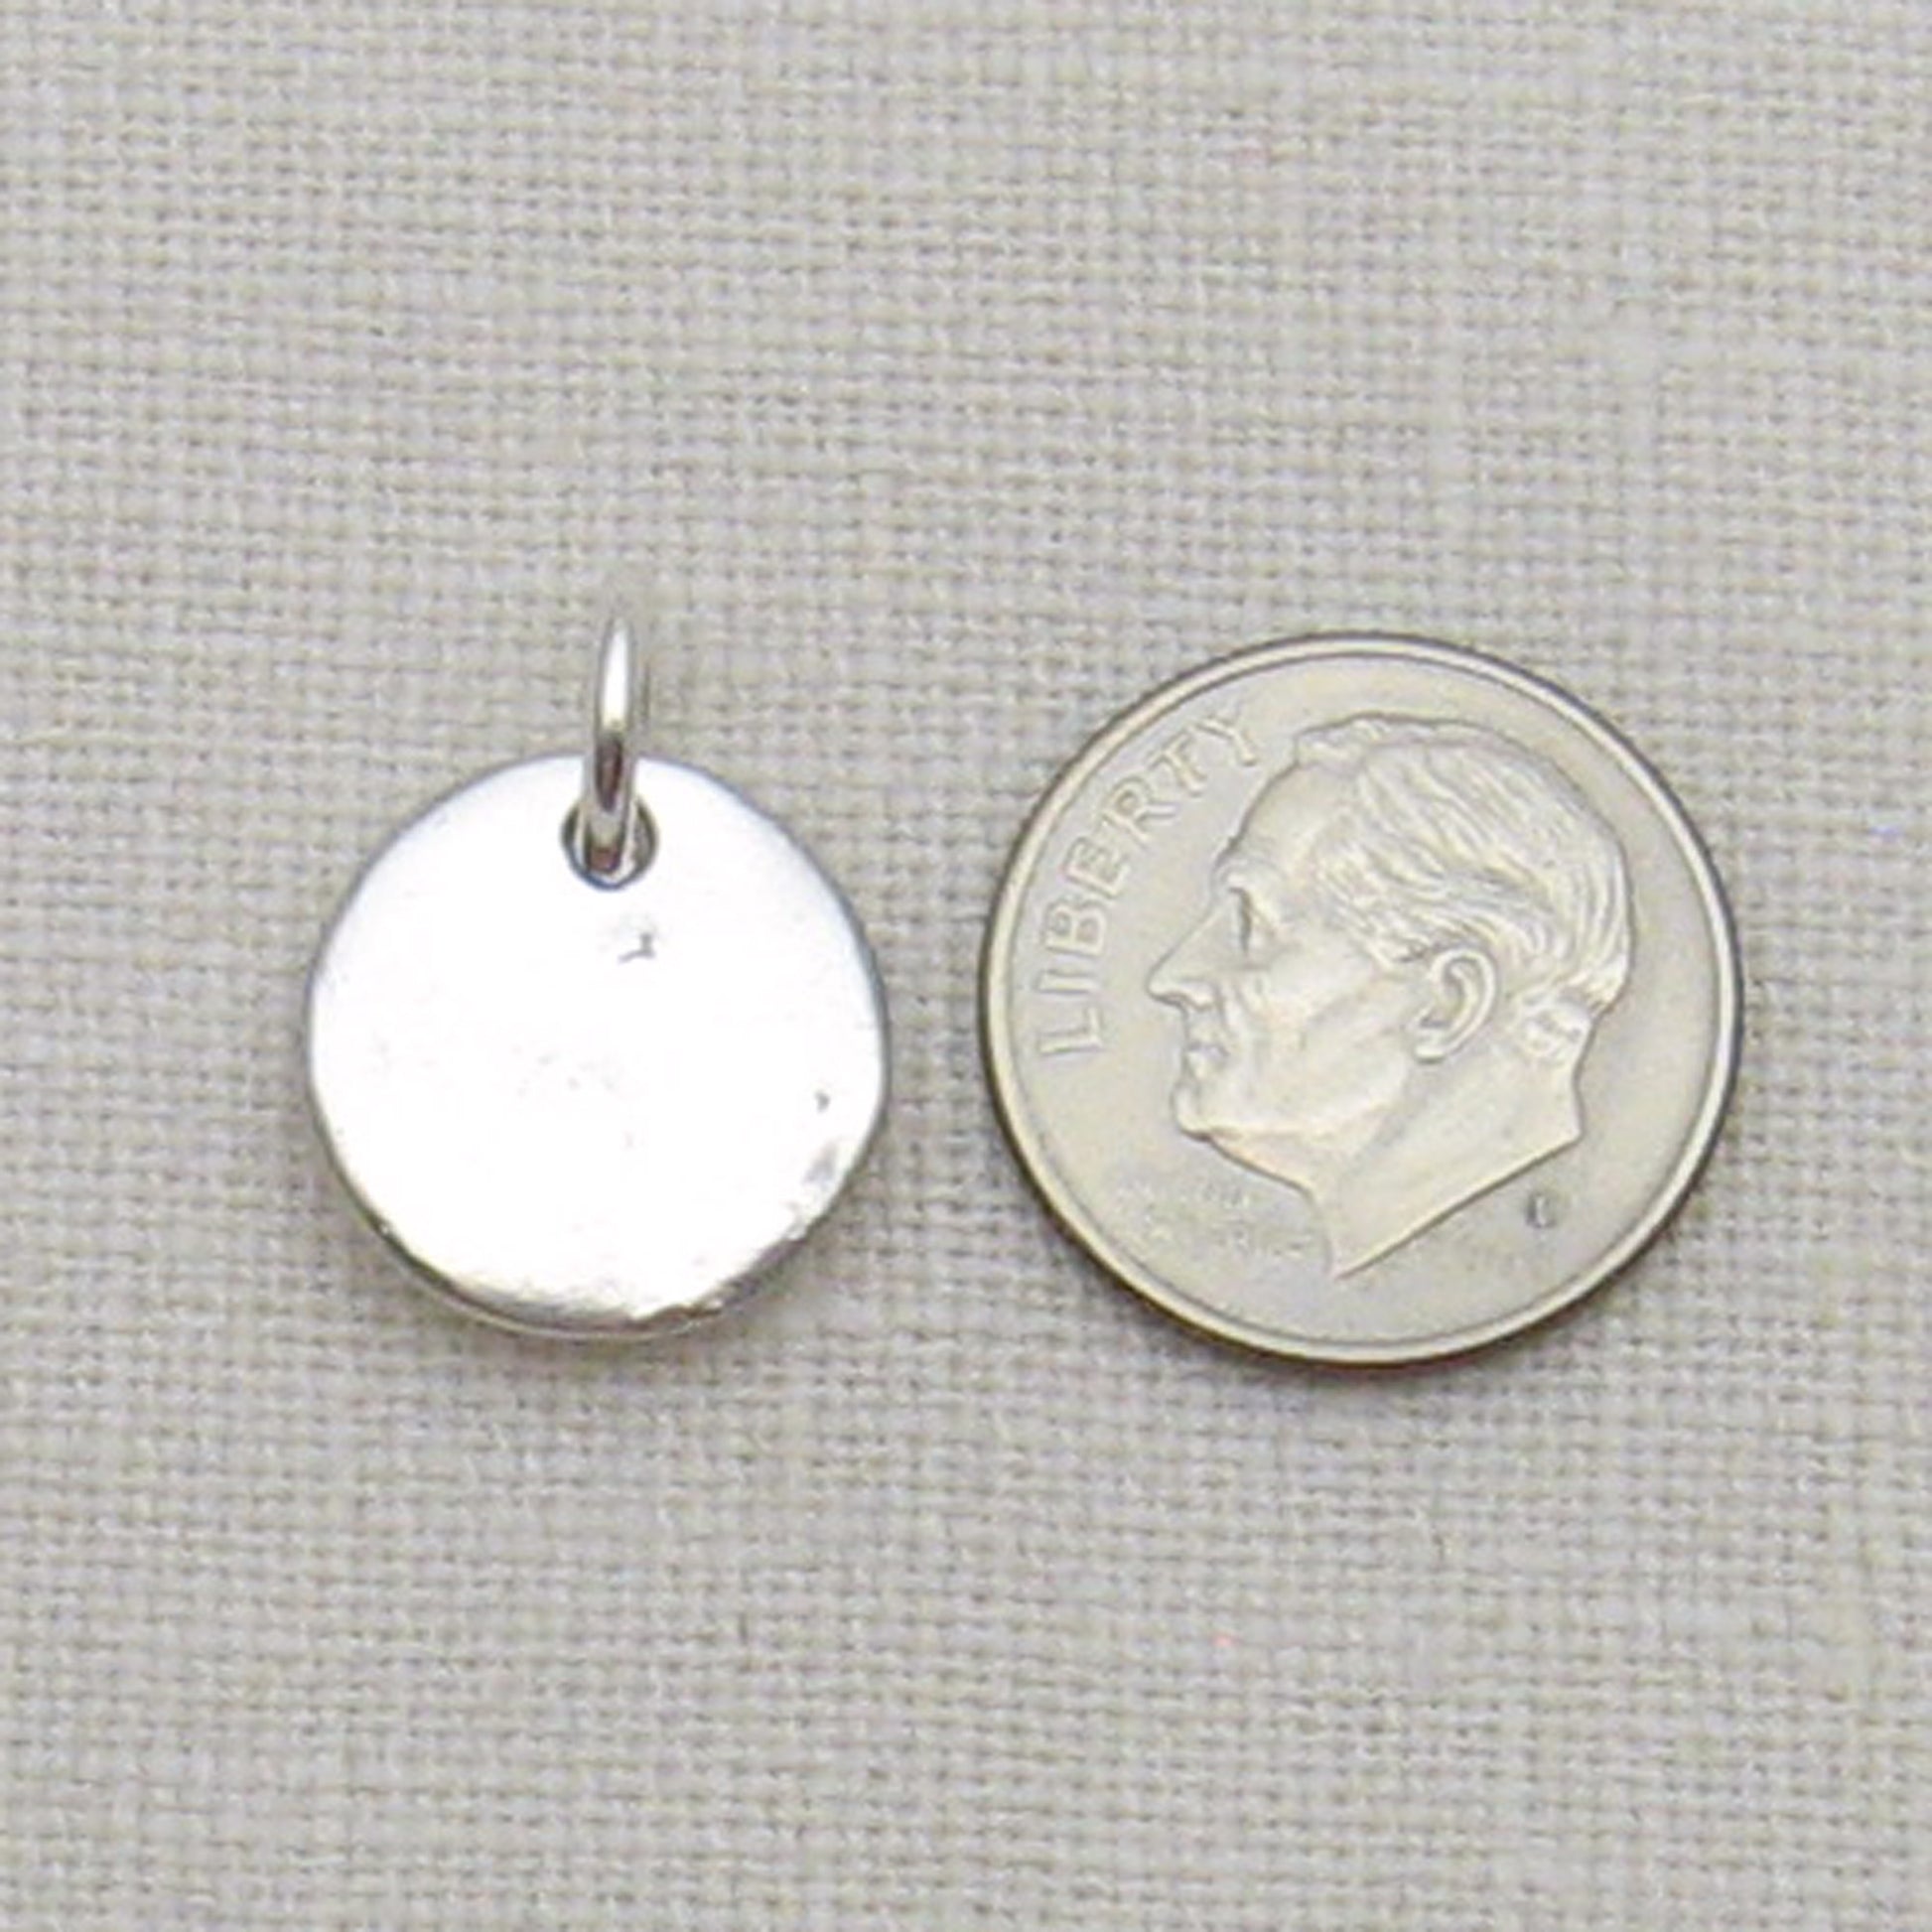 Half Inch Circle Cremation Ashes Pendant back and size reference